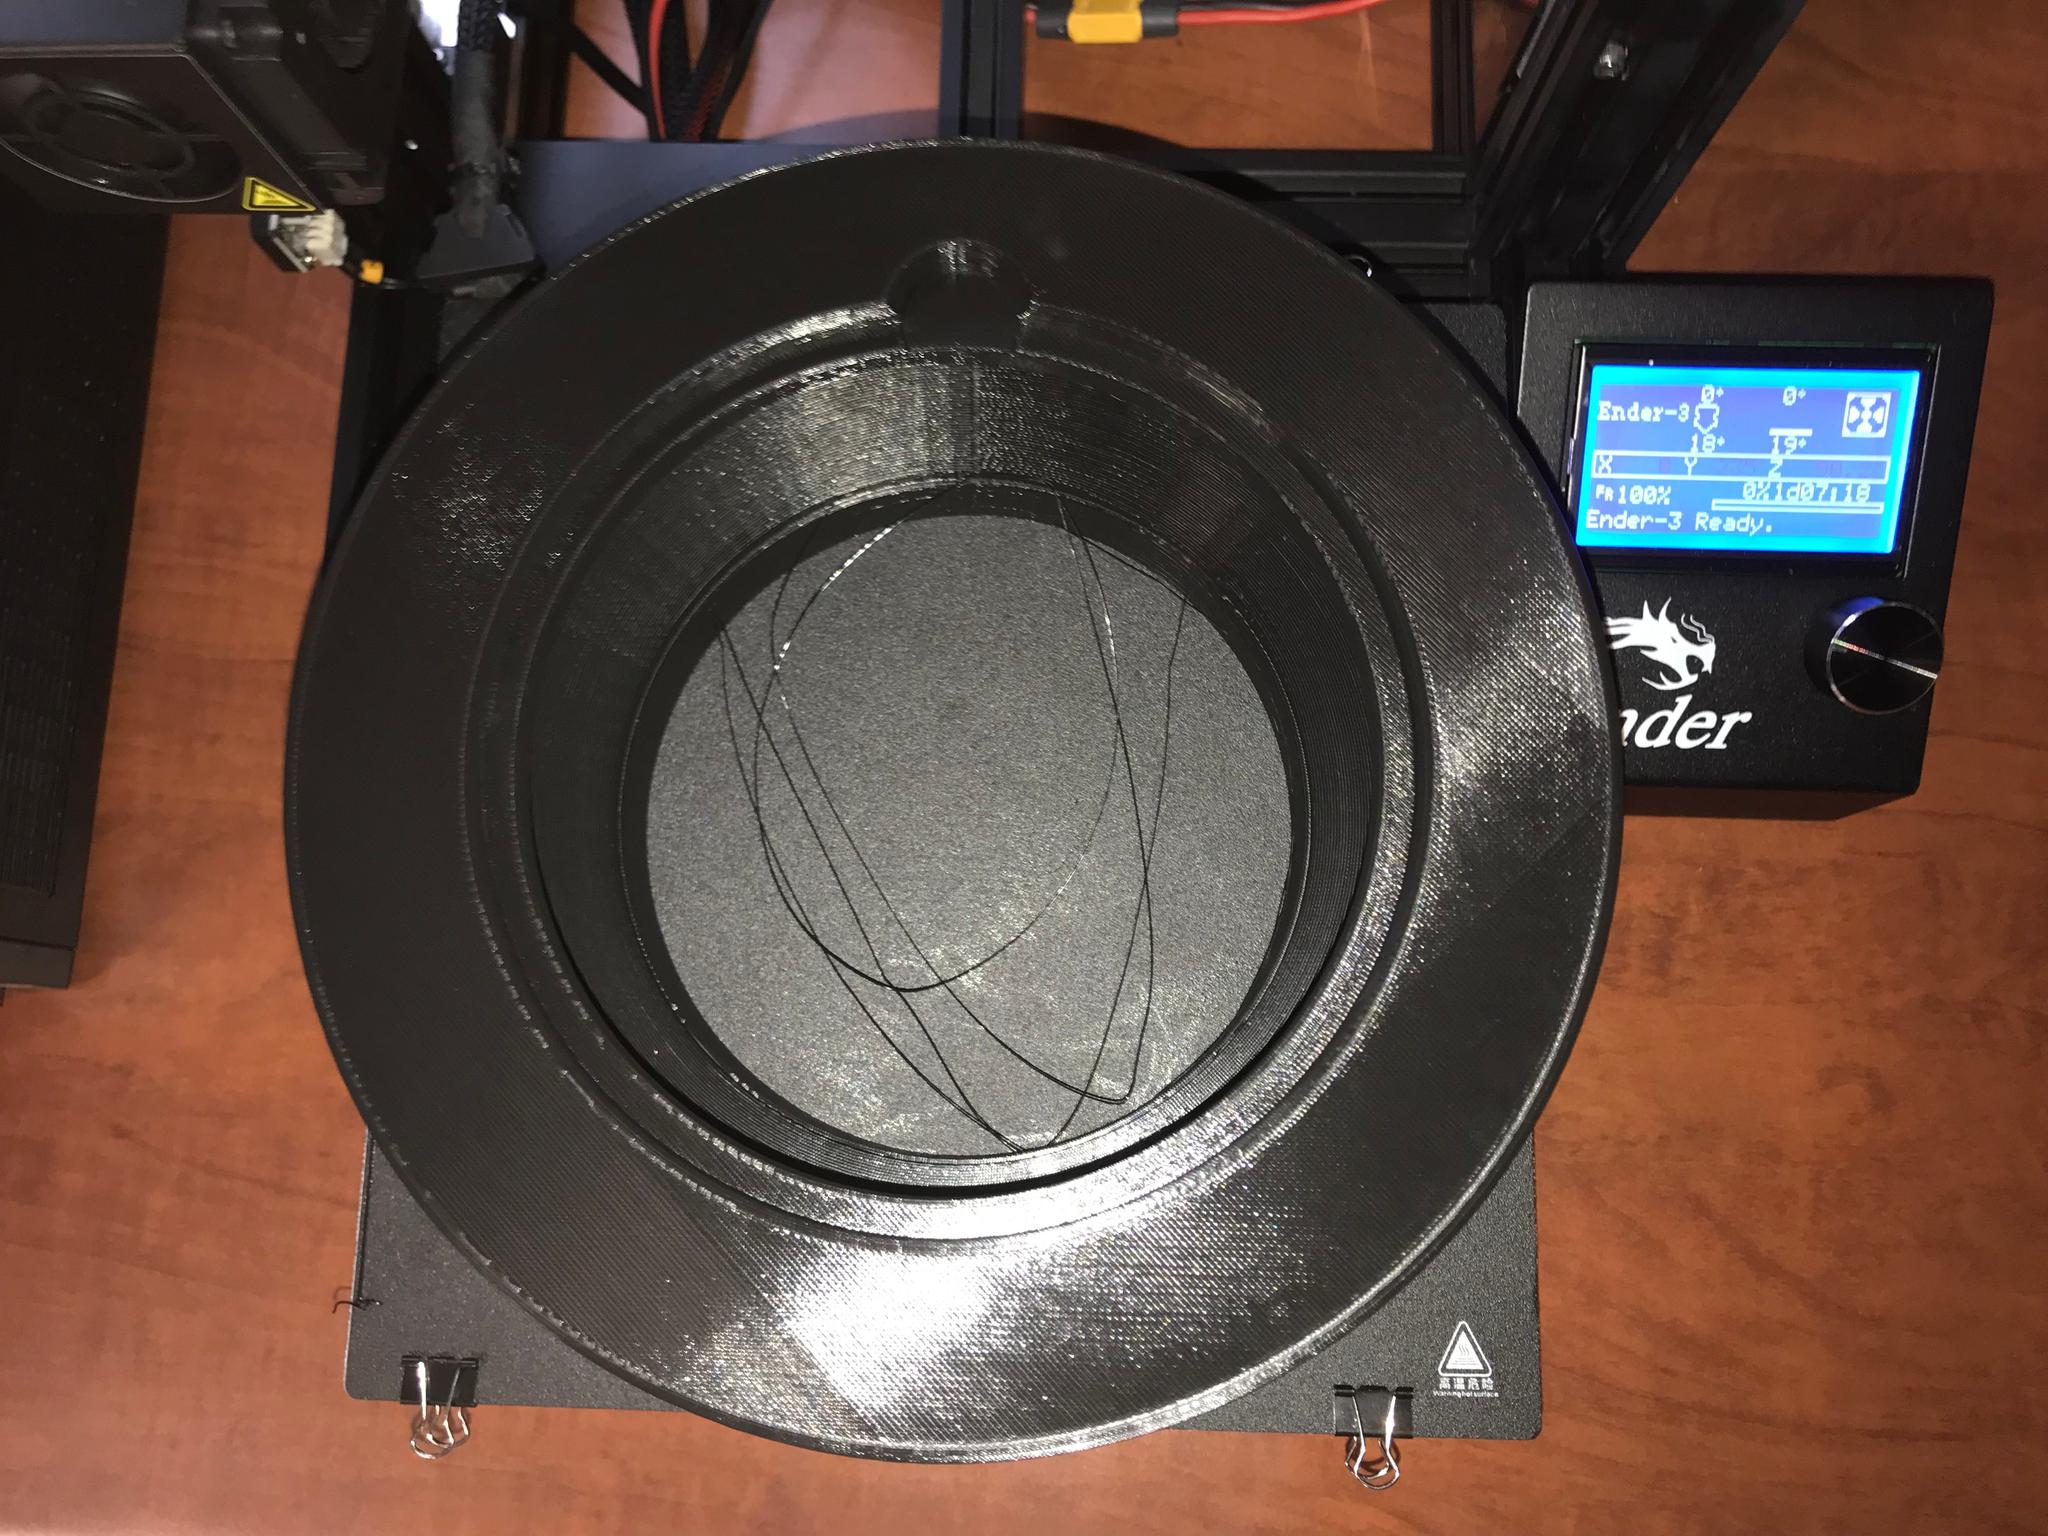 Top view of completed print.